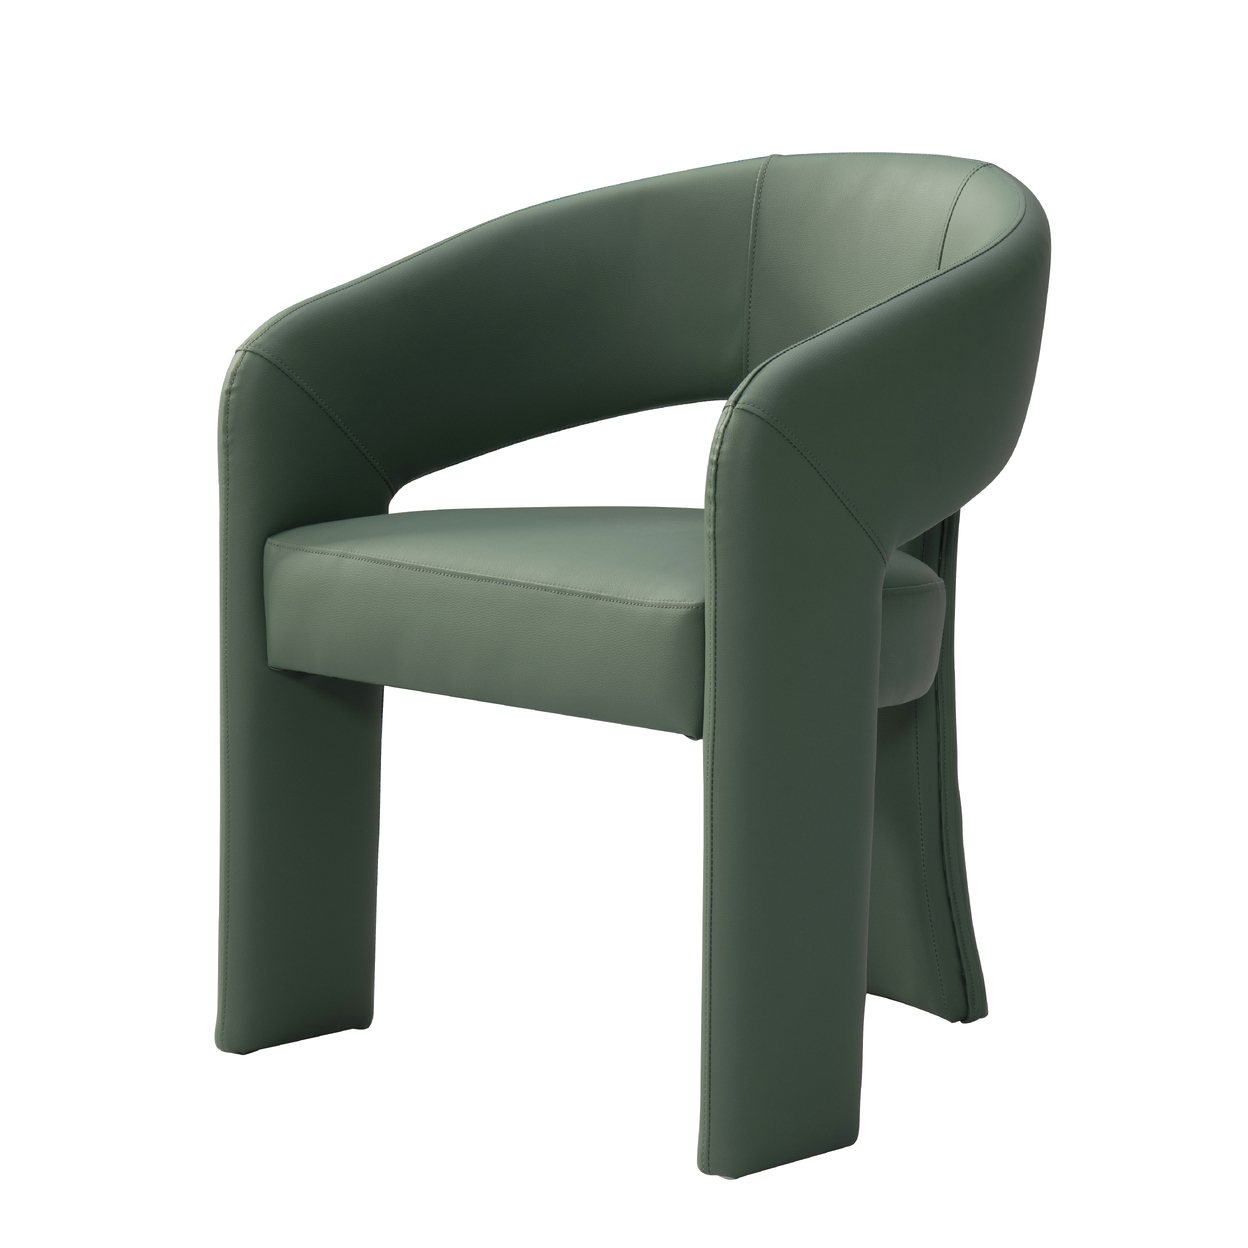 Iconic Home Schnider Dining Chair Faux Leather Upholstered Curved Seat Back Sculptural Base (1 Piece), Modern Contemporary - Green